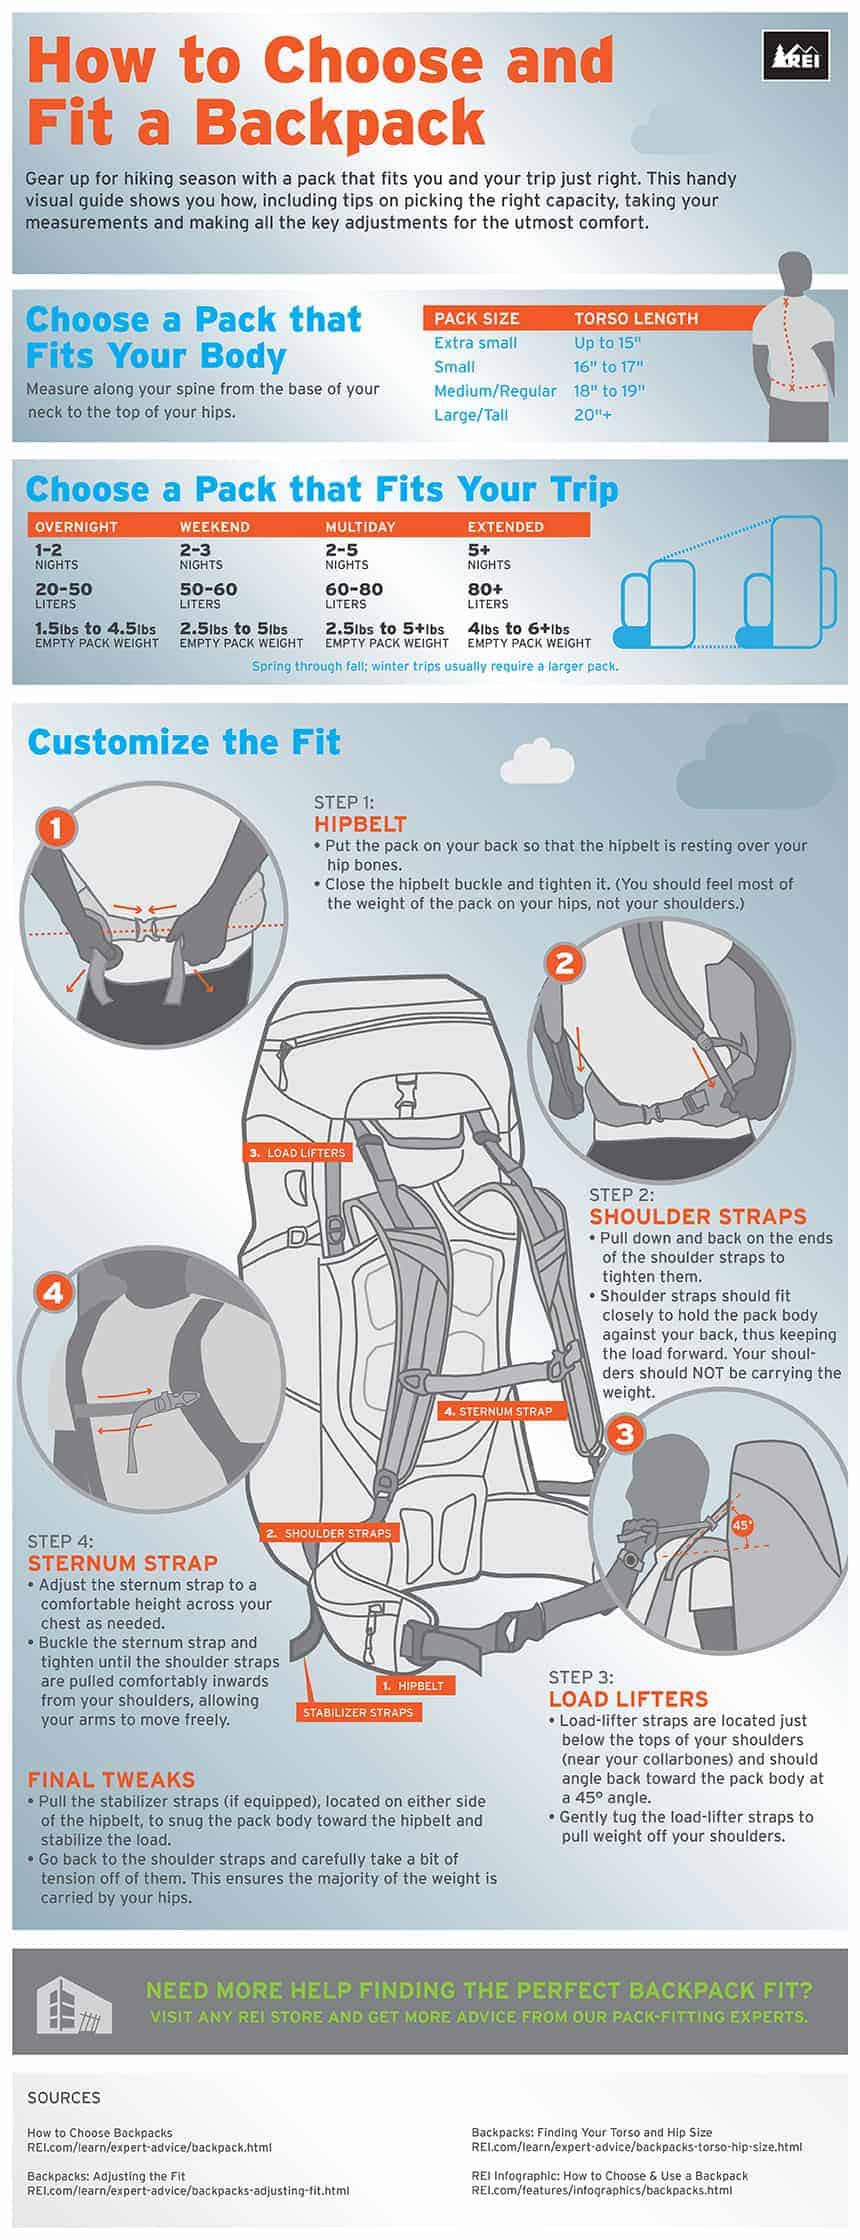 how to fit a backpack infographic